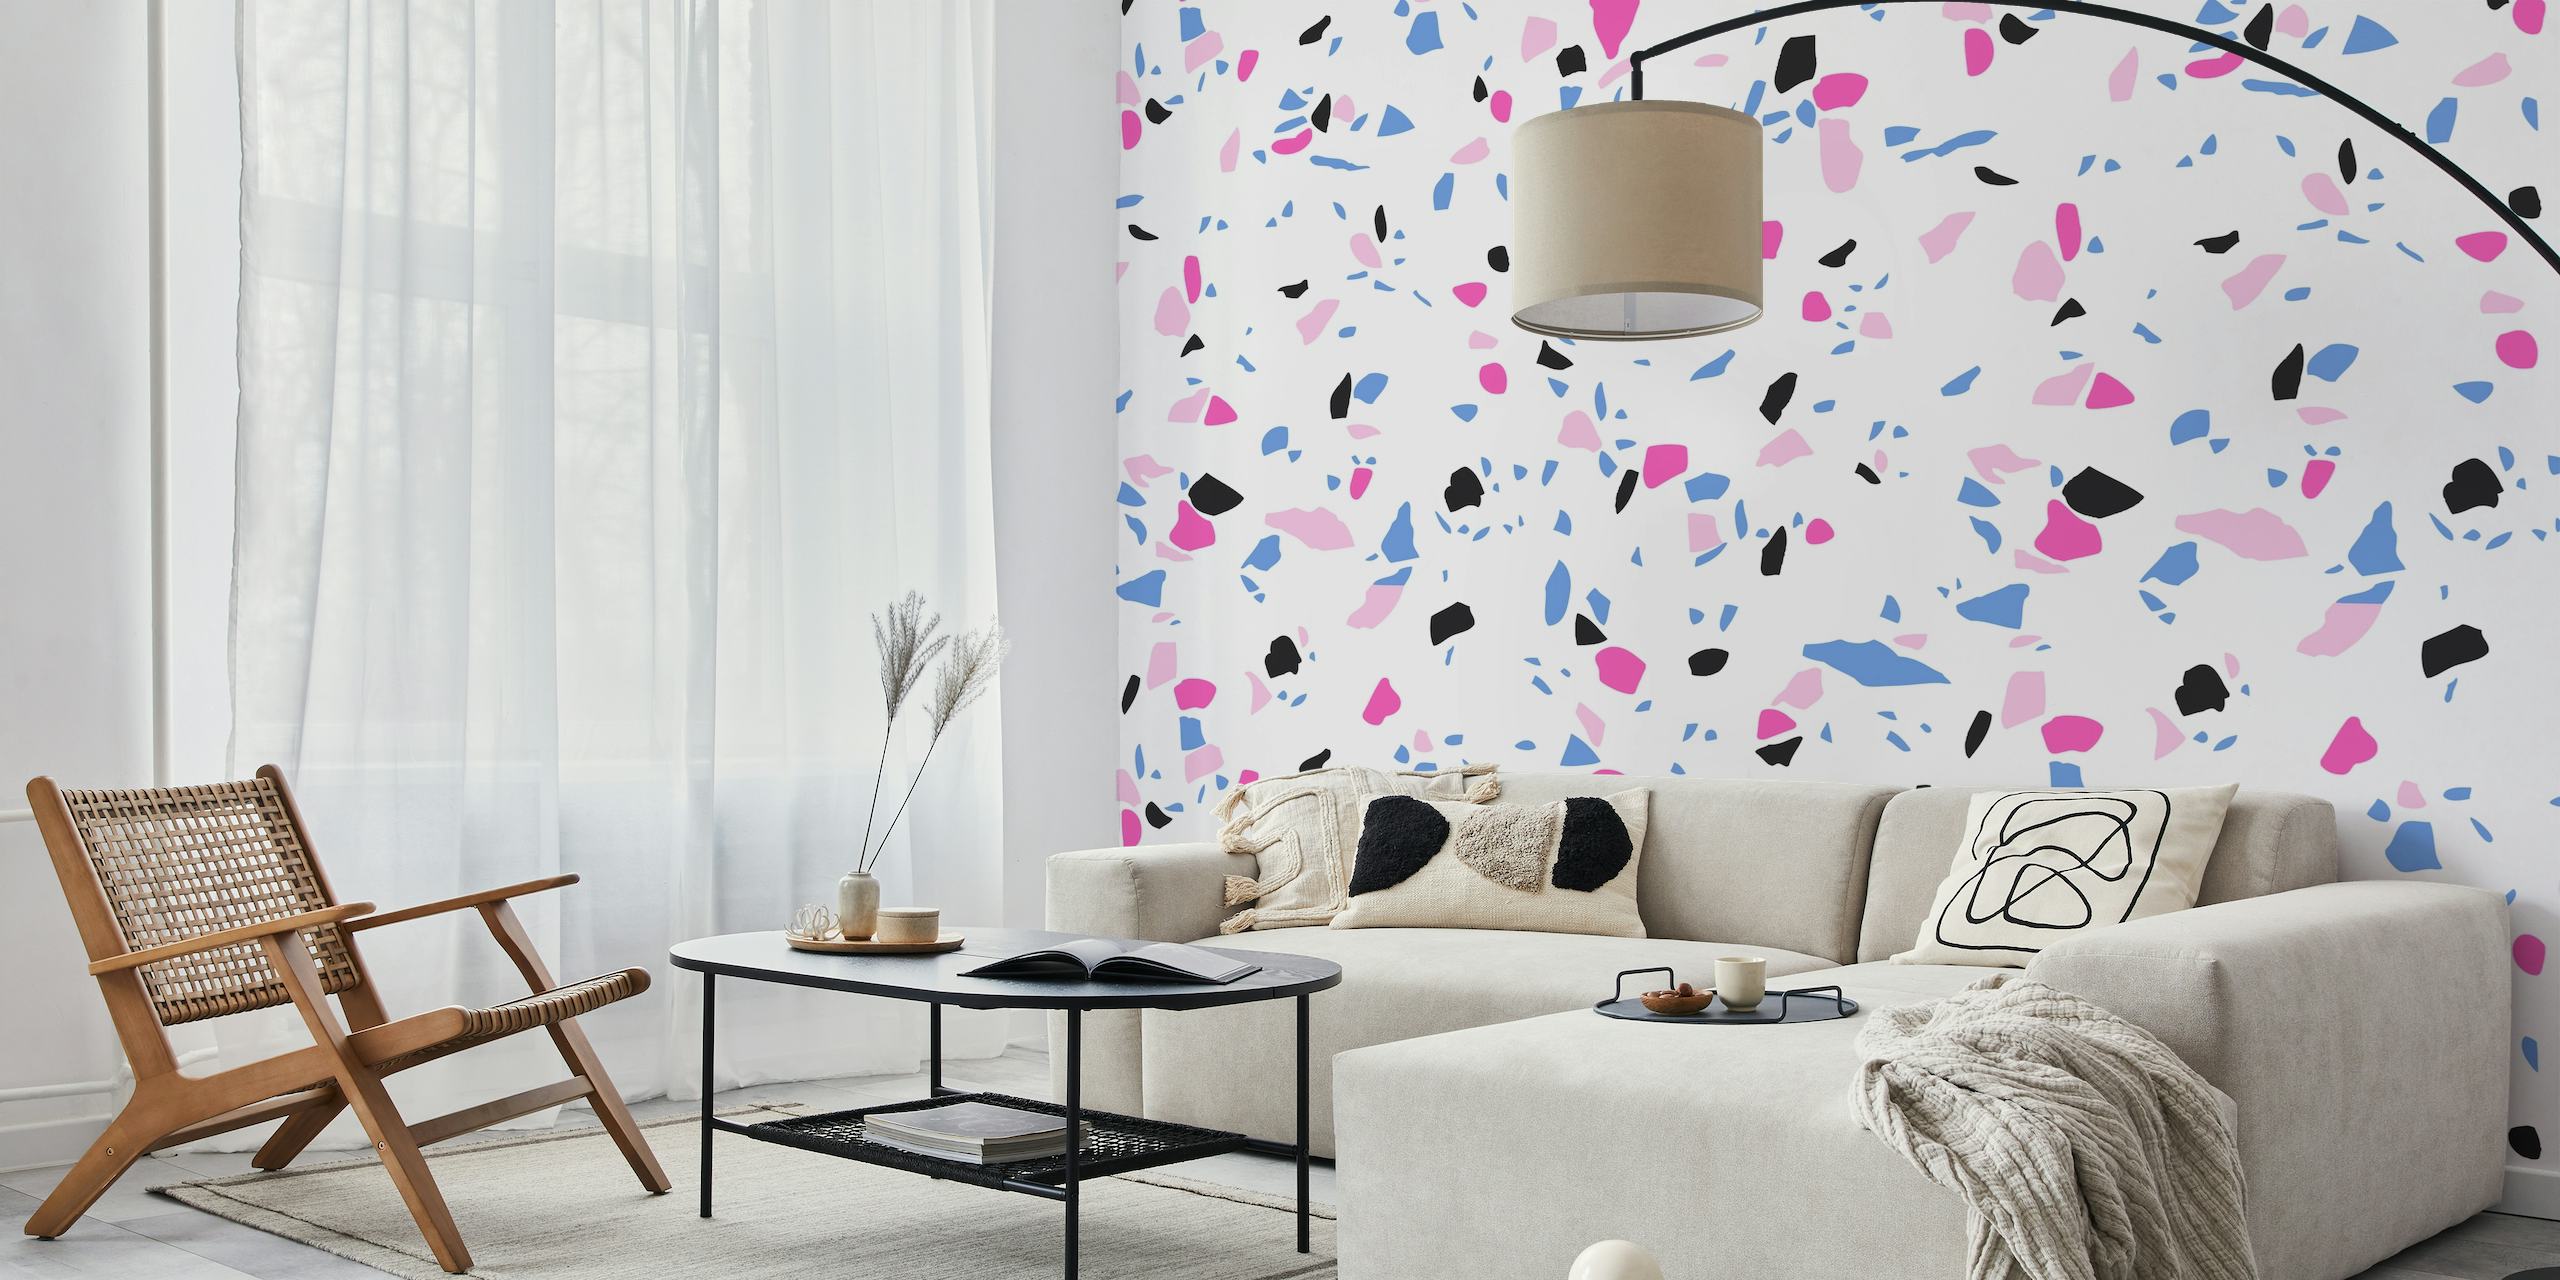 Terrazzo Style 2 wall mural with pink, blue, and black speckles on a white background